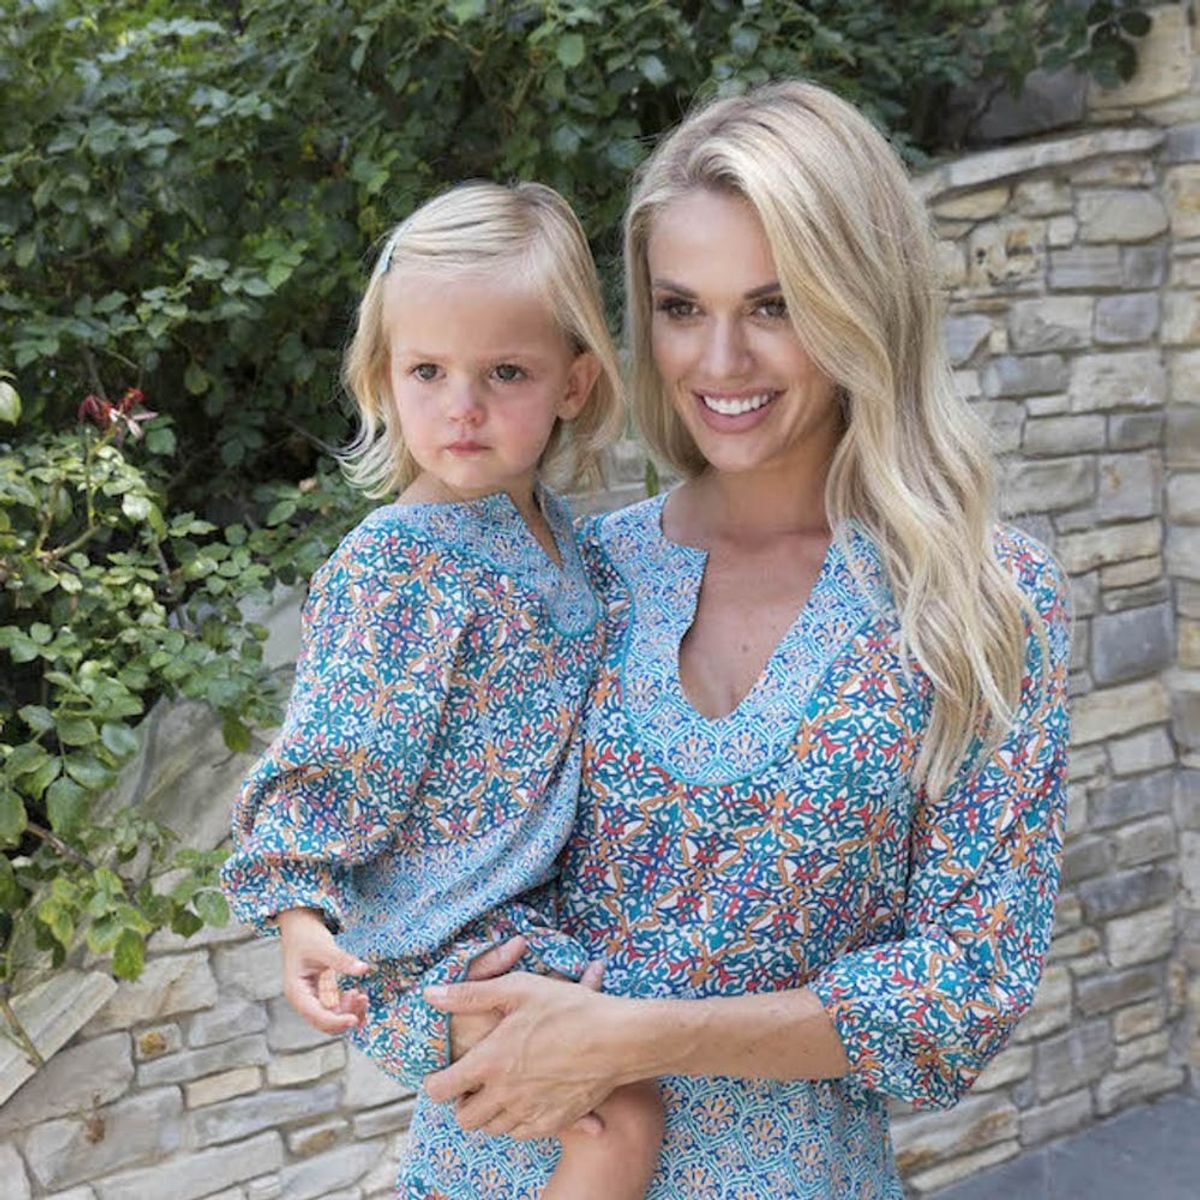 Nicky Hilton Just Designed a Mommy and Me Line Based on Her Jet-Setter Life